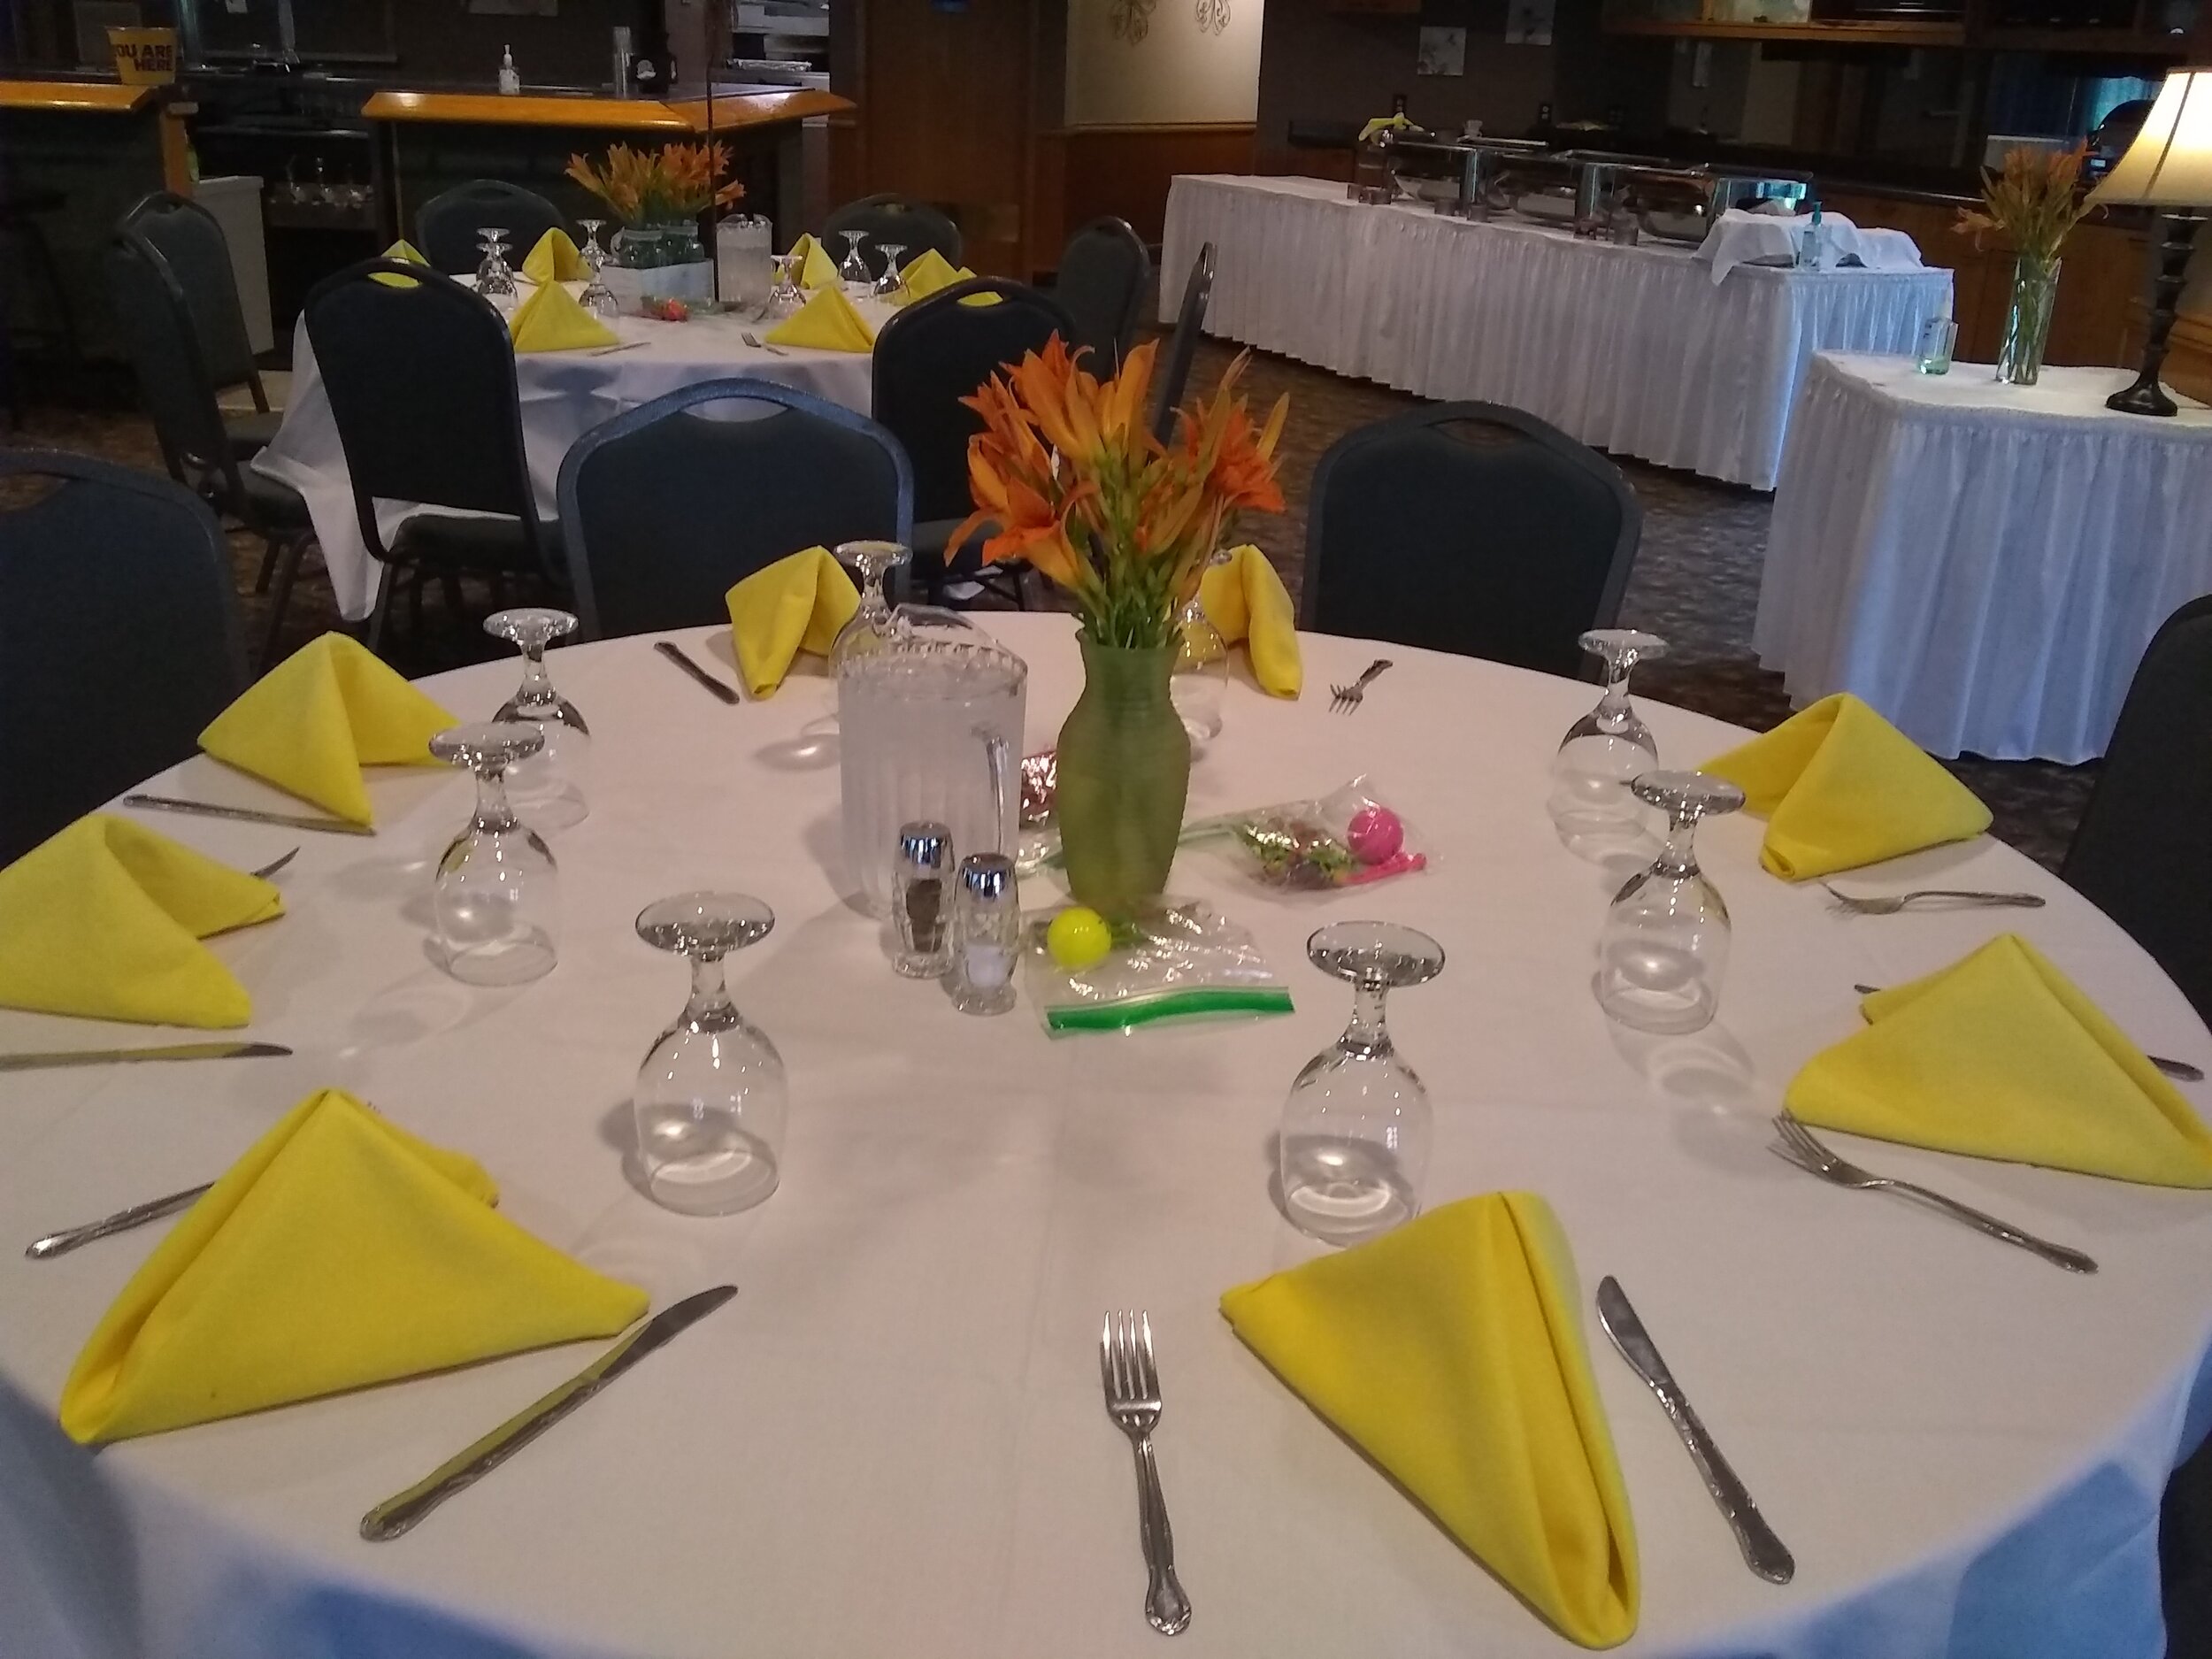 Pic of table setting from Monday Women's league.jpg